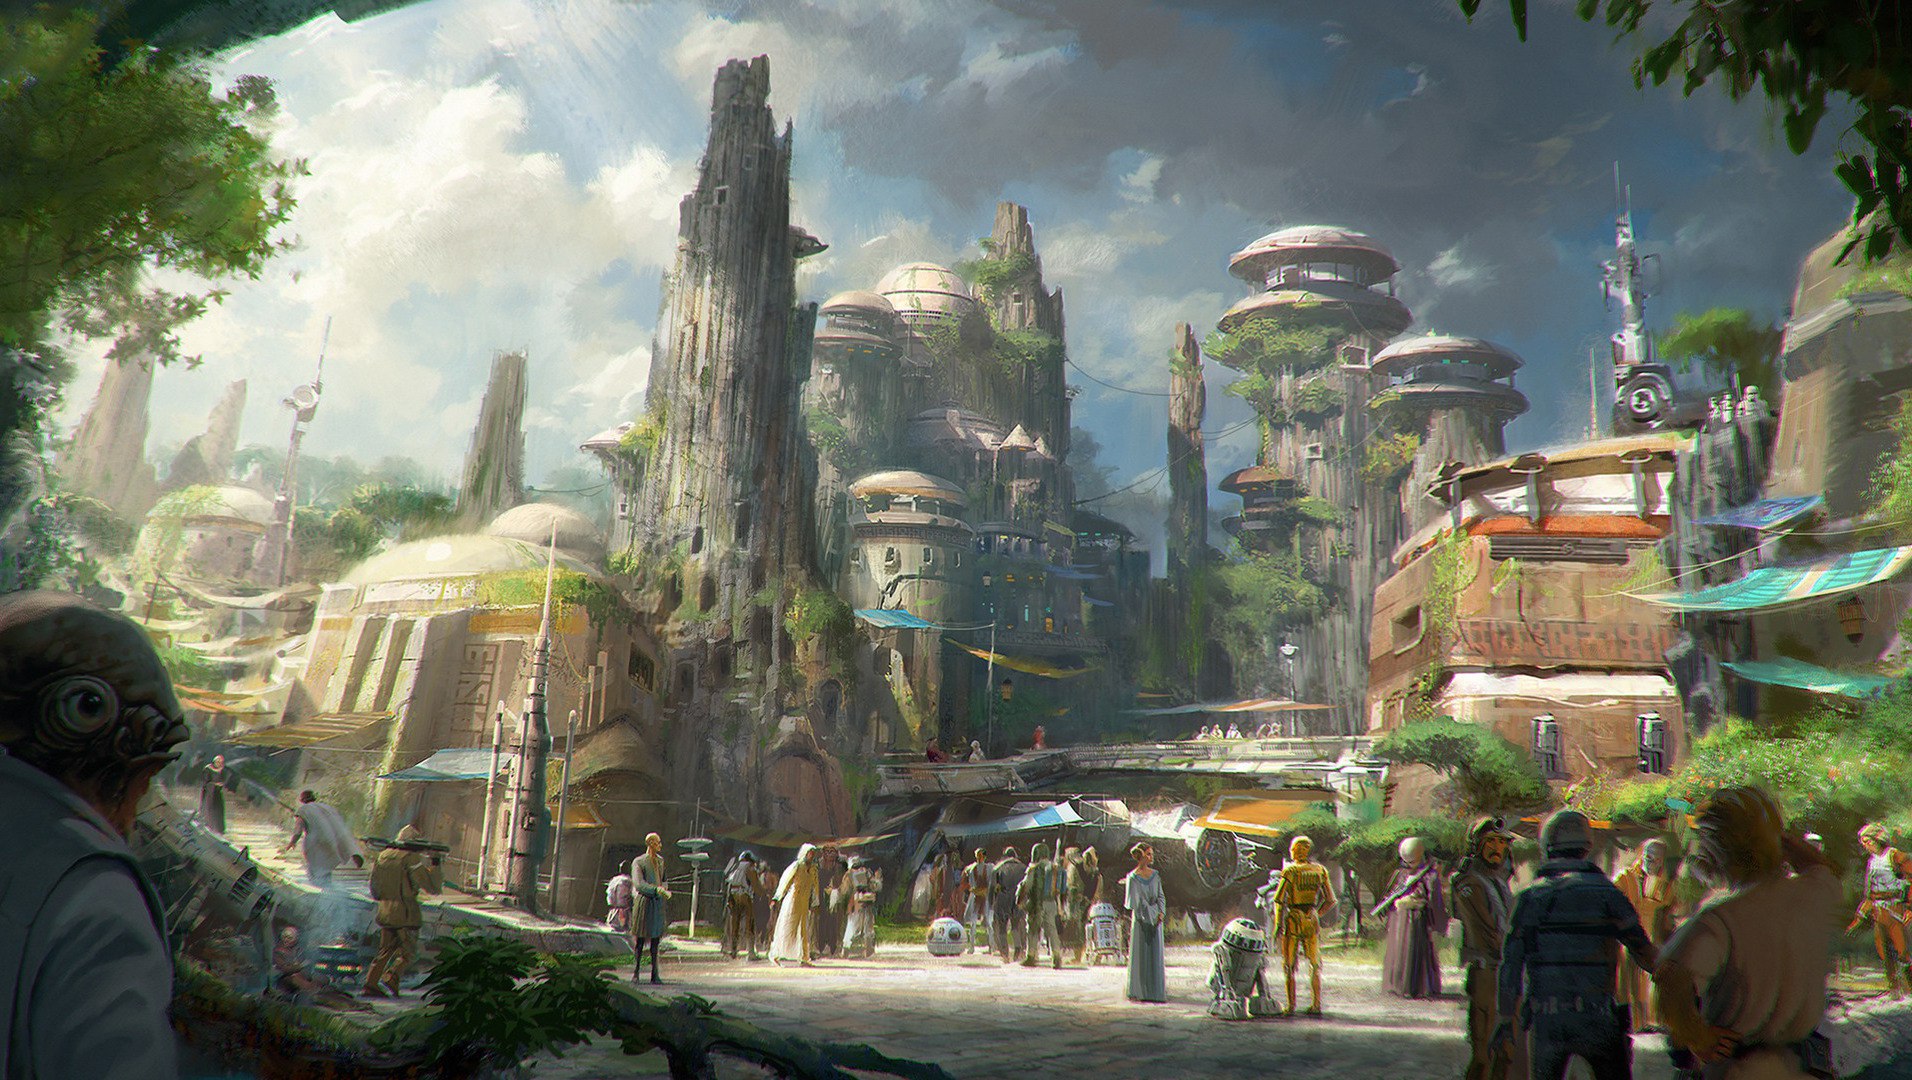 Star Wars Land: Our first glimpse of its layout and attractions